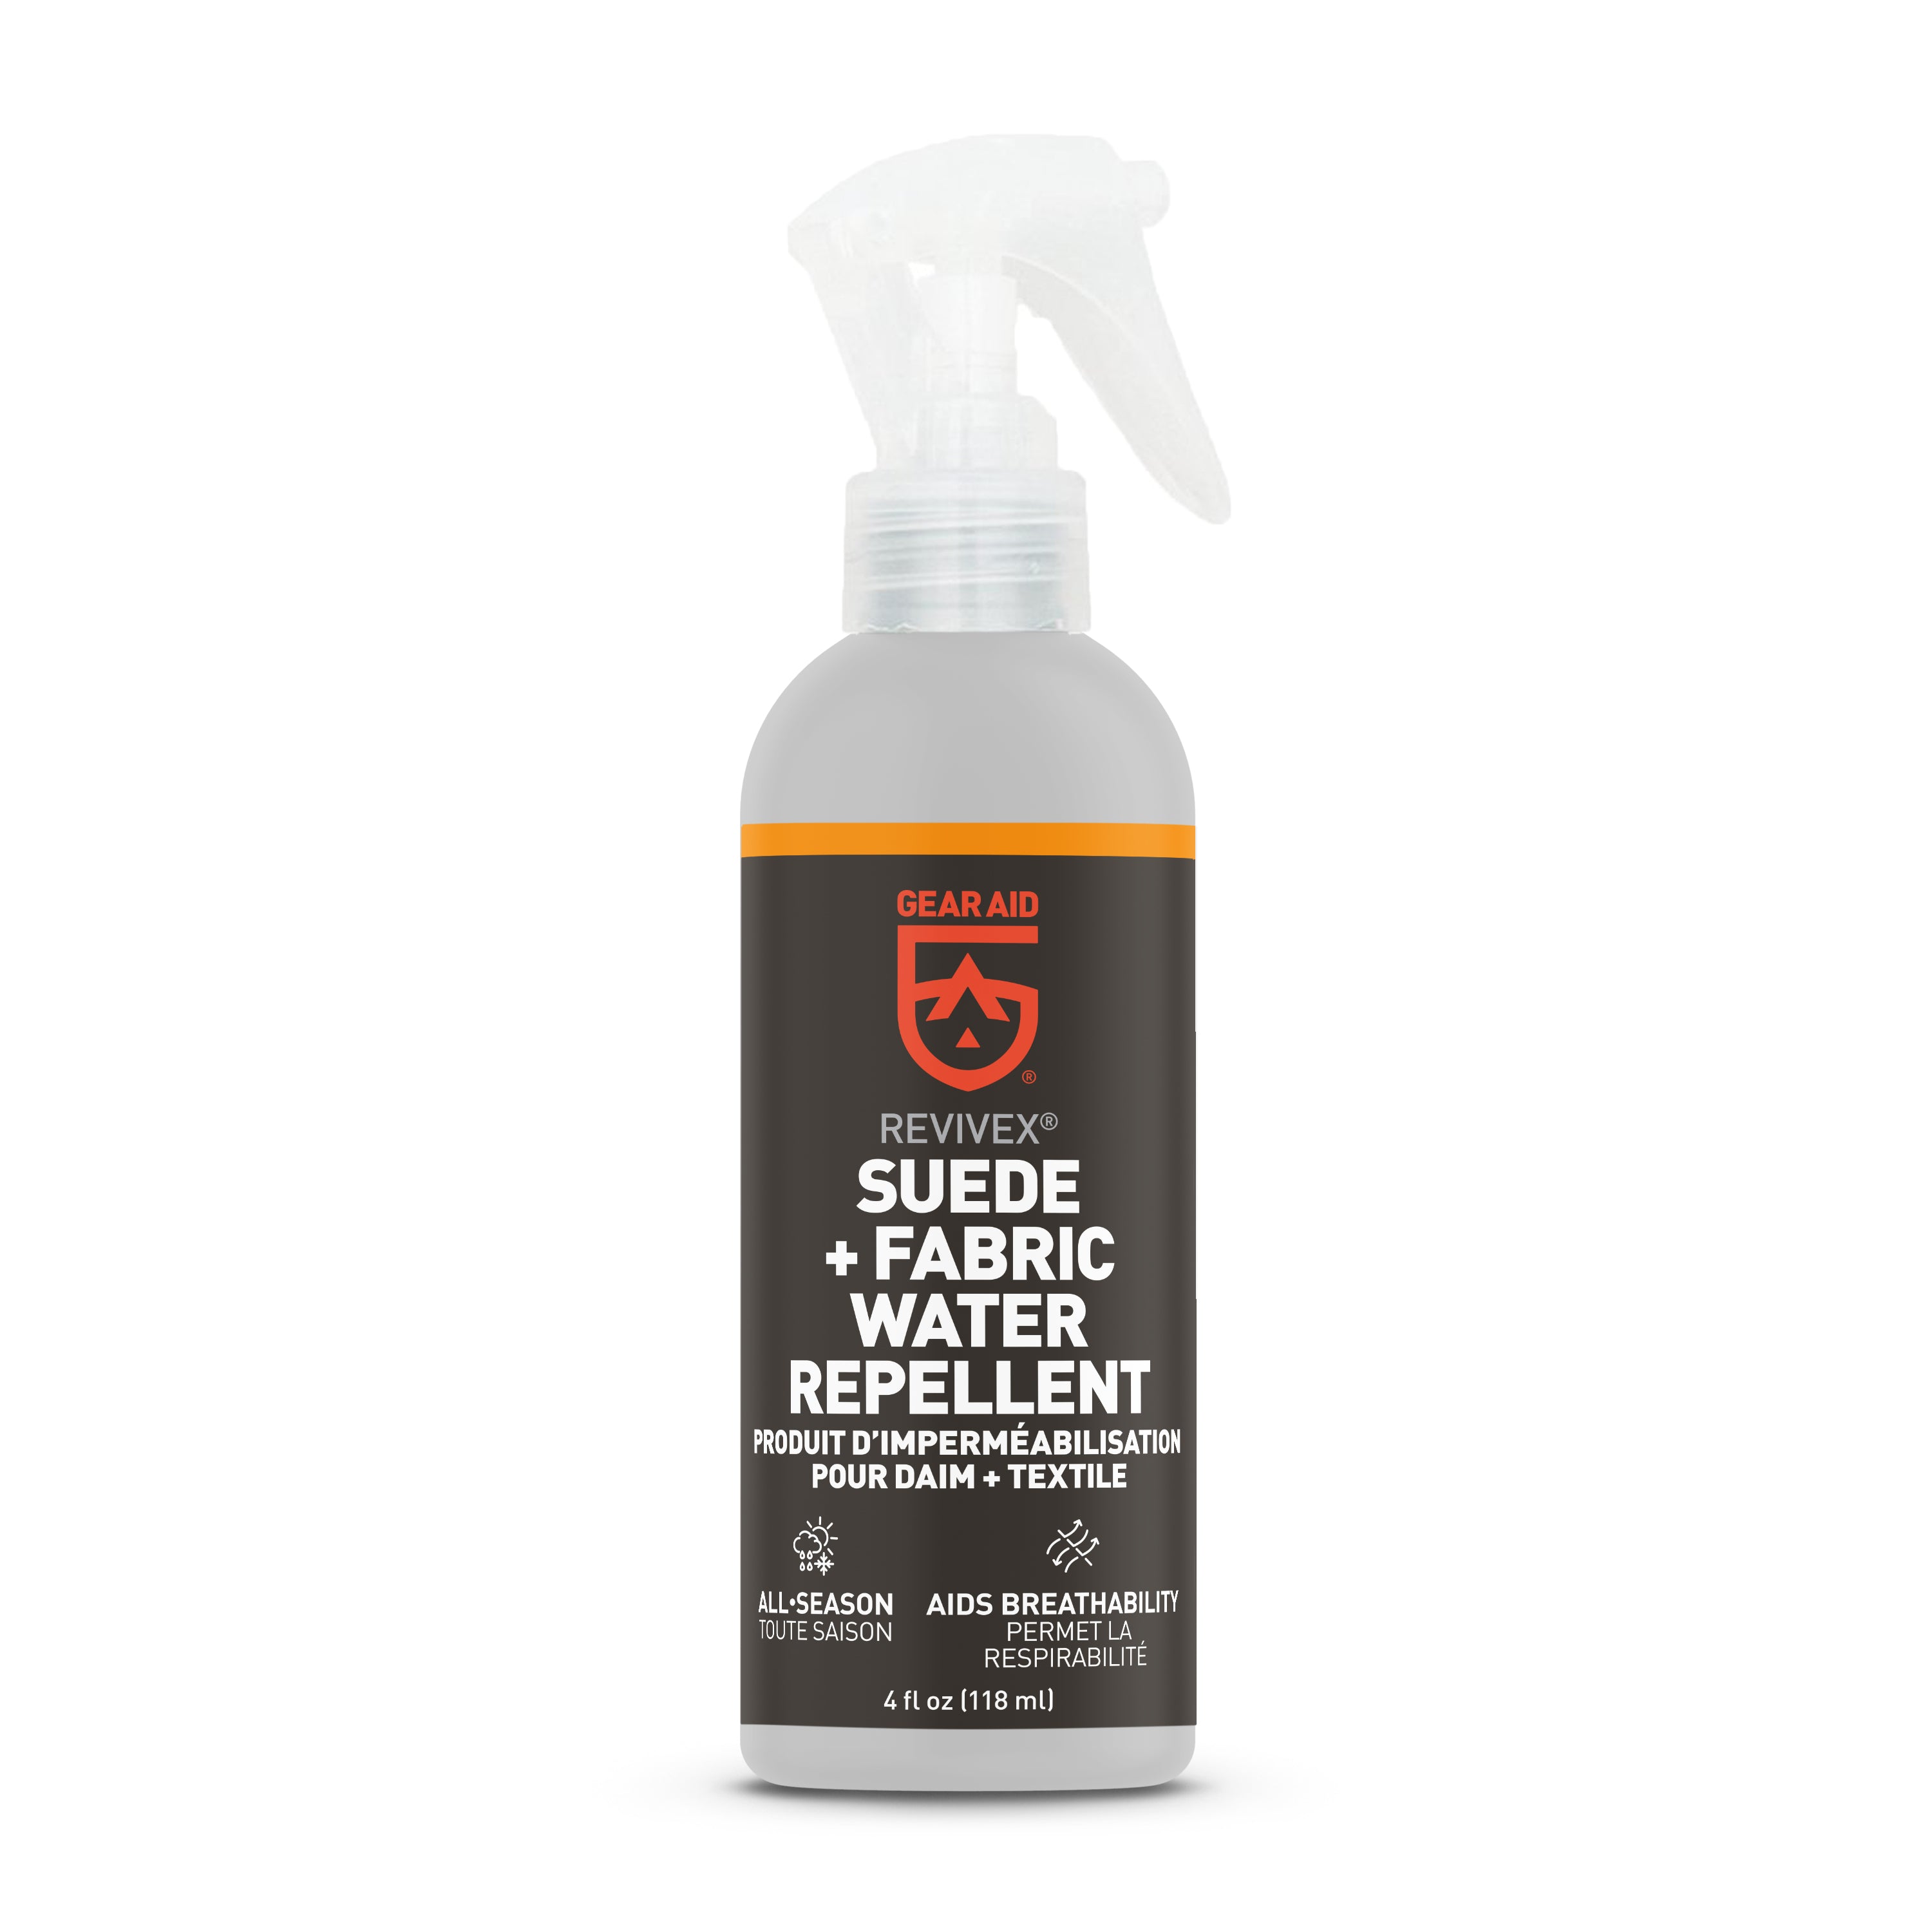 water resistant spray for suede shoes